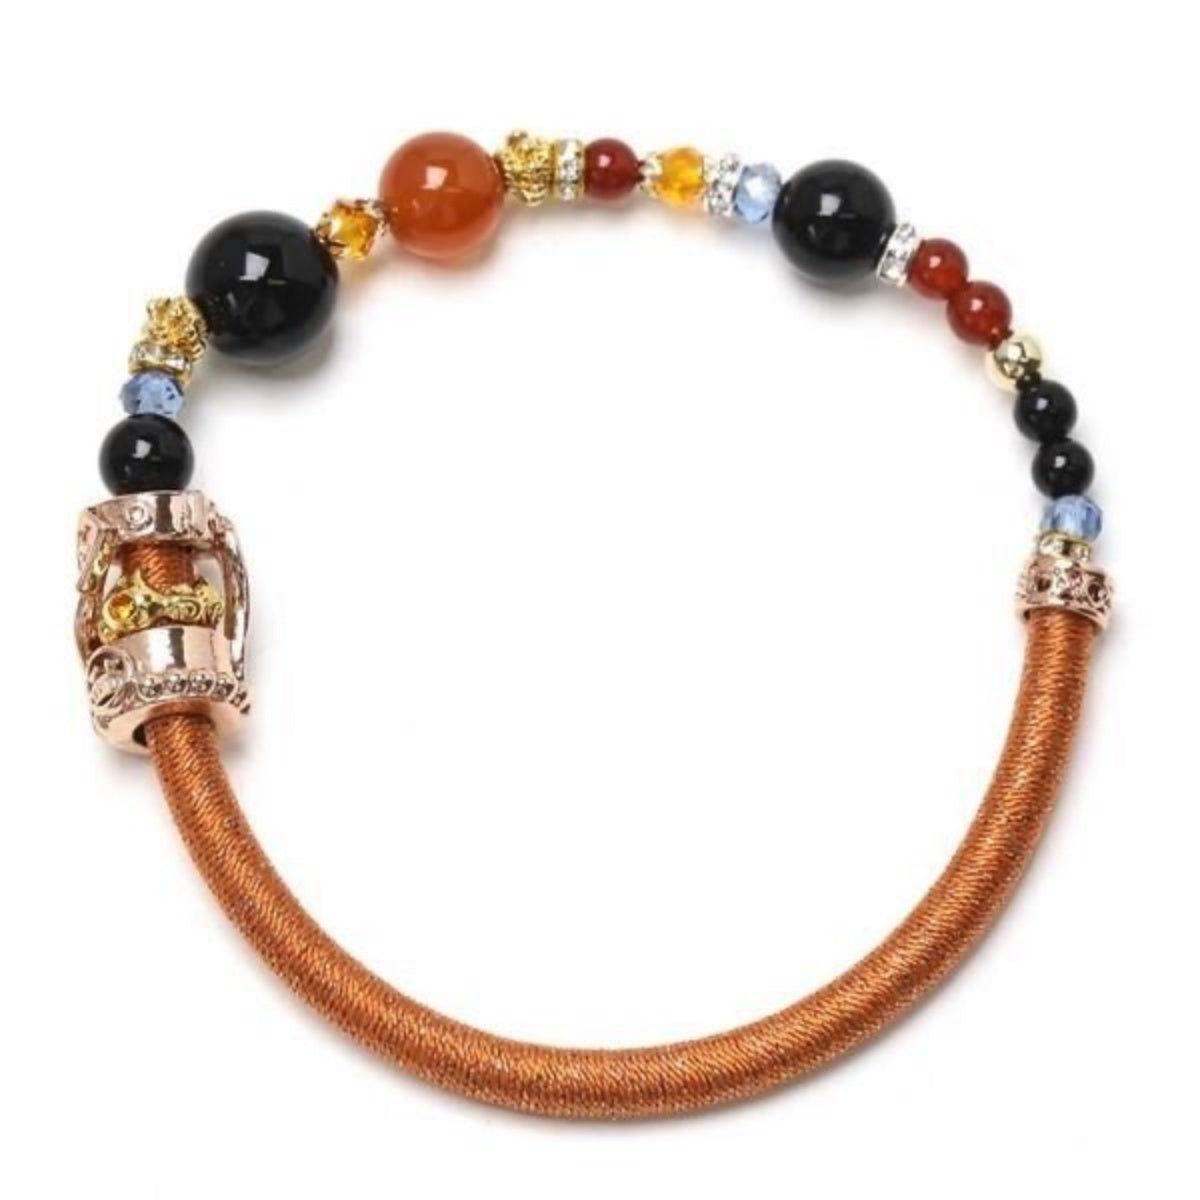 Ace style bracelet, exquisite workmanship, fusion of anime character elements of the trend bracelet.